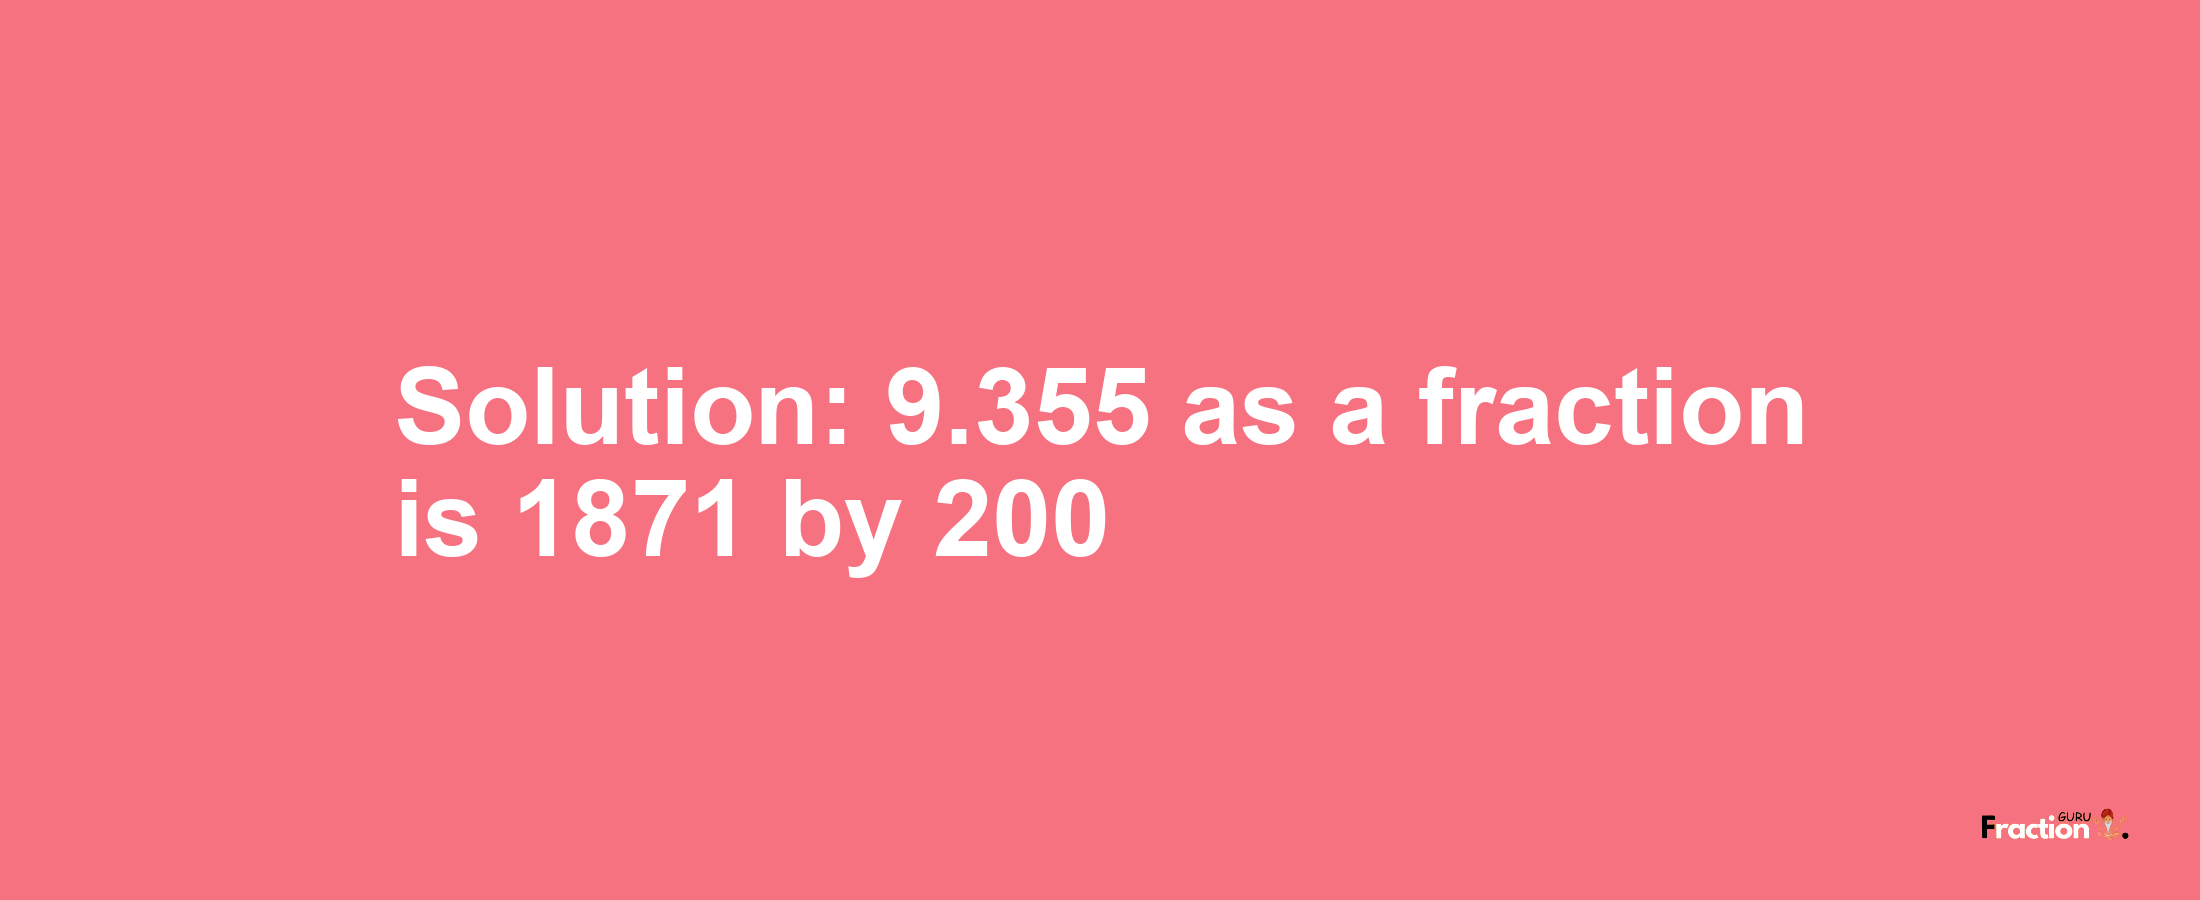 Solution:9.355 as a fraction is 1871/200